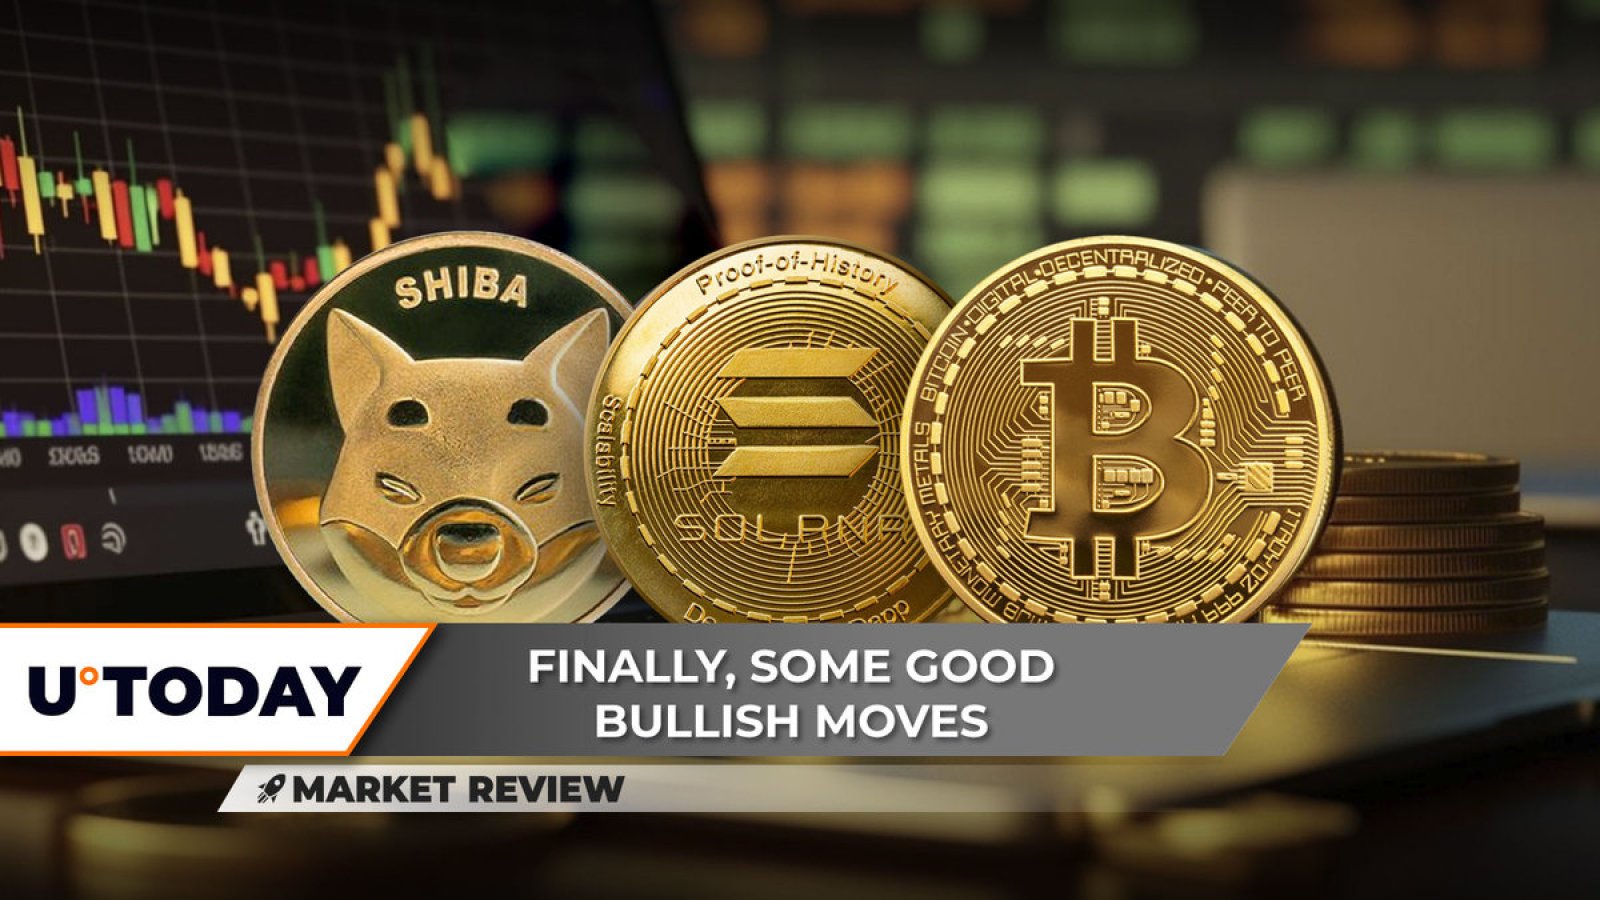 Finally Shiba Inu (SHIB) on the Verge of Breakthrough, Solana (SOL) Will Be Squeezed, Is Bitcoin (BTC) Breaking Out of Downtrend?